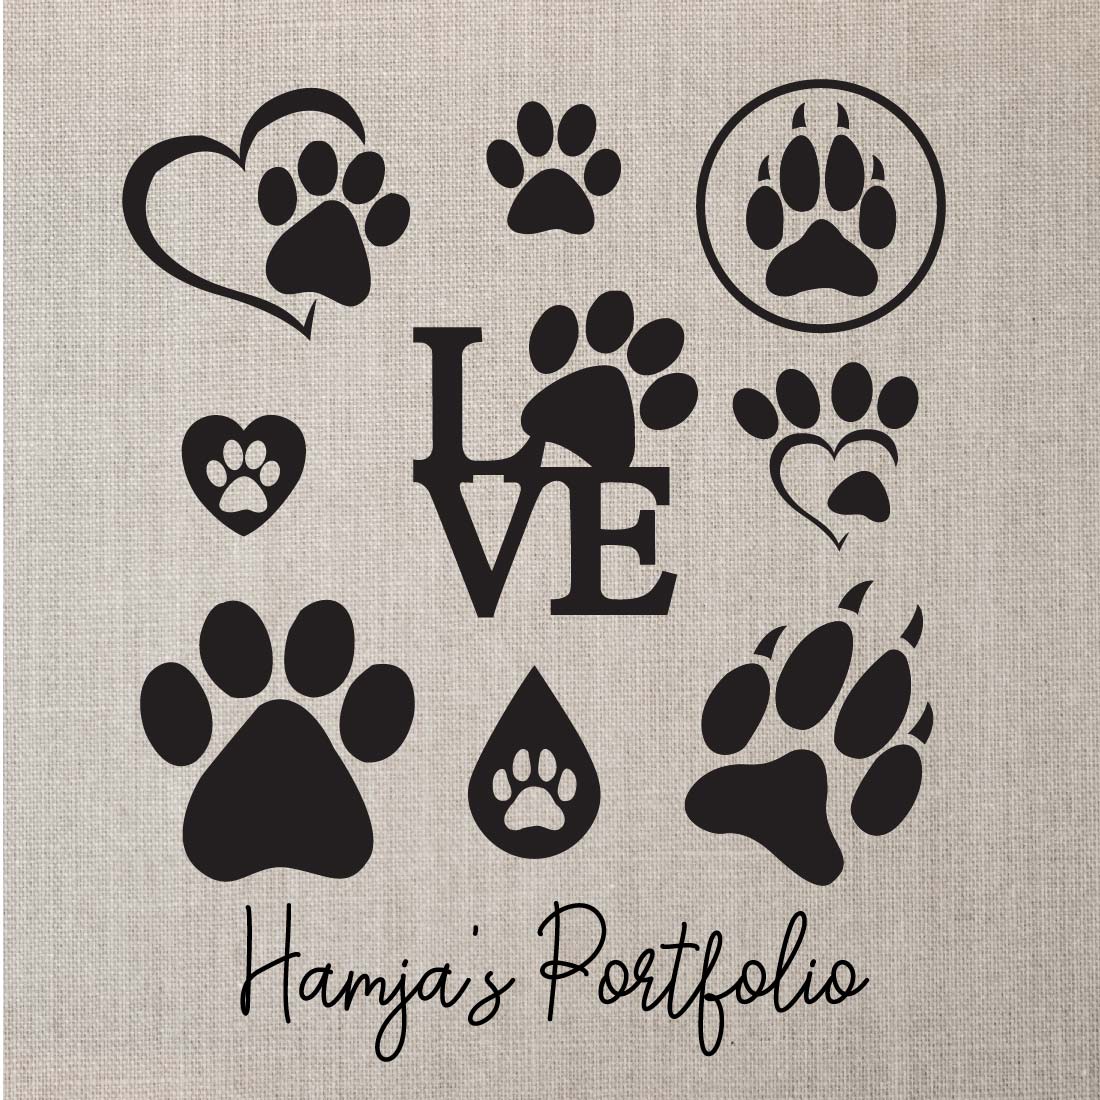 Pawprint preview image.